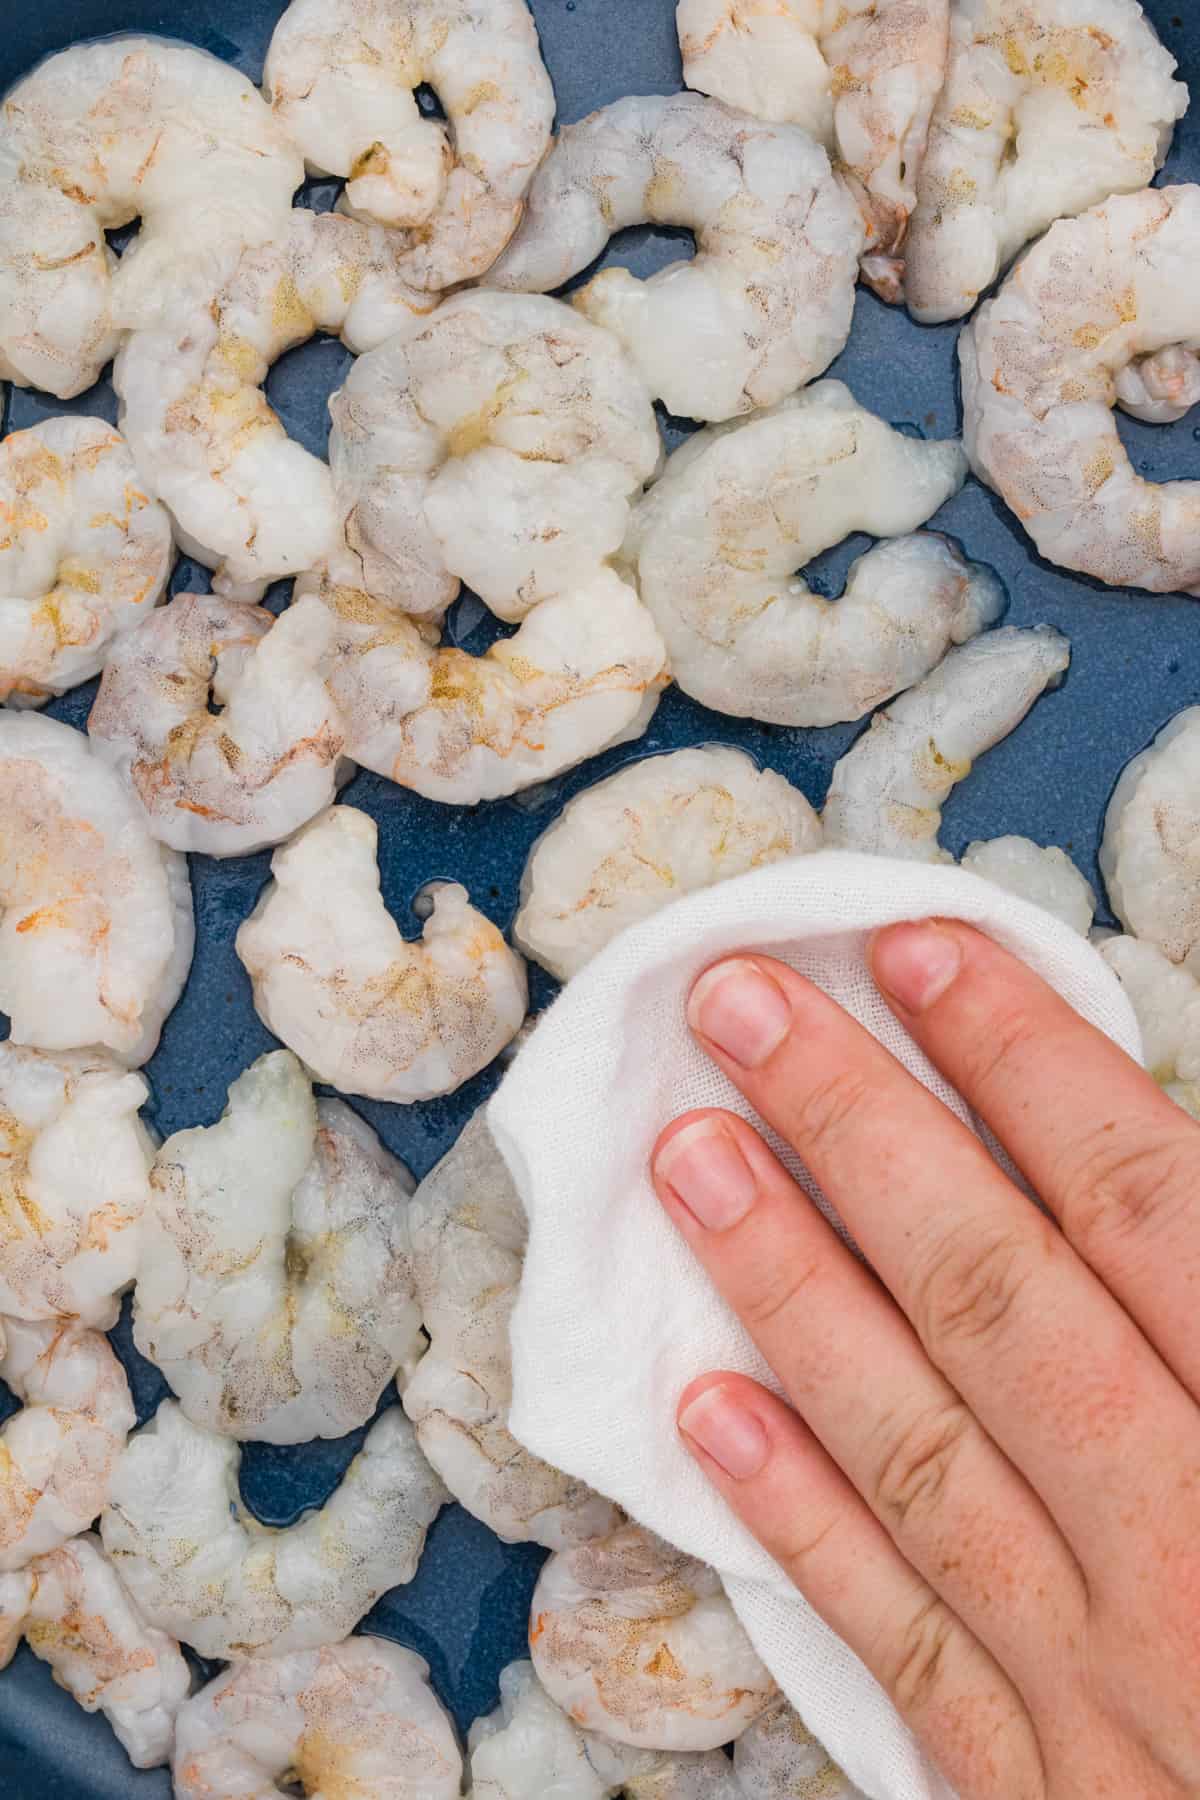 Raw shrimp being patted down dry in preparation for Shrimp Scampi Pasta.